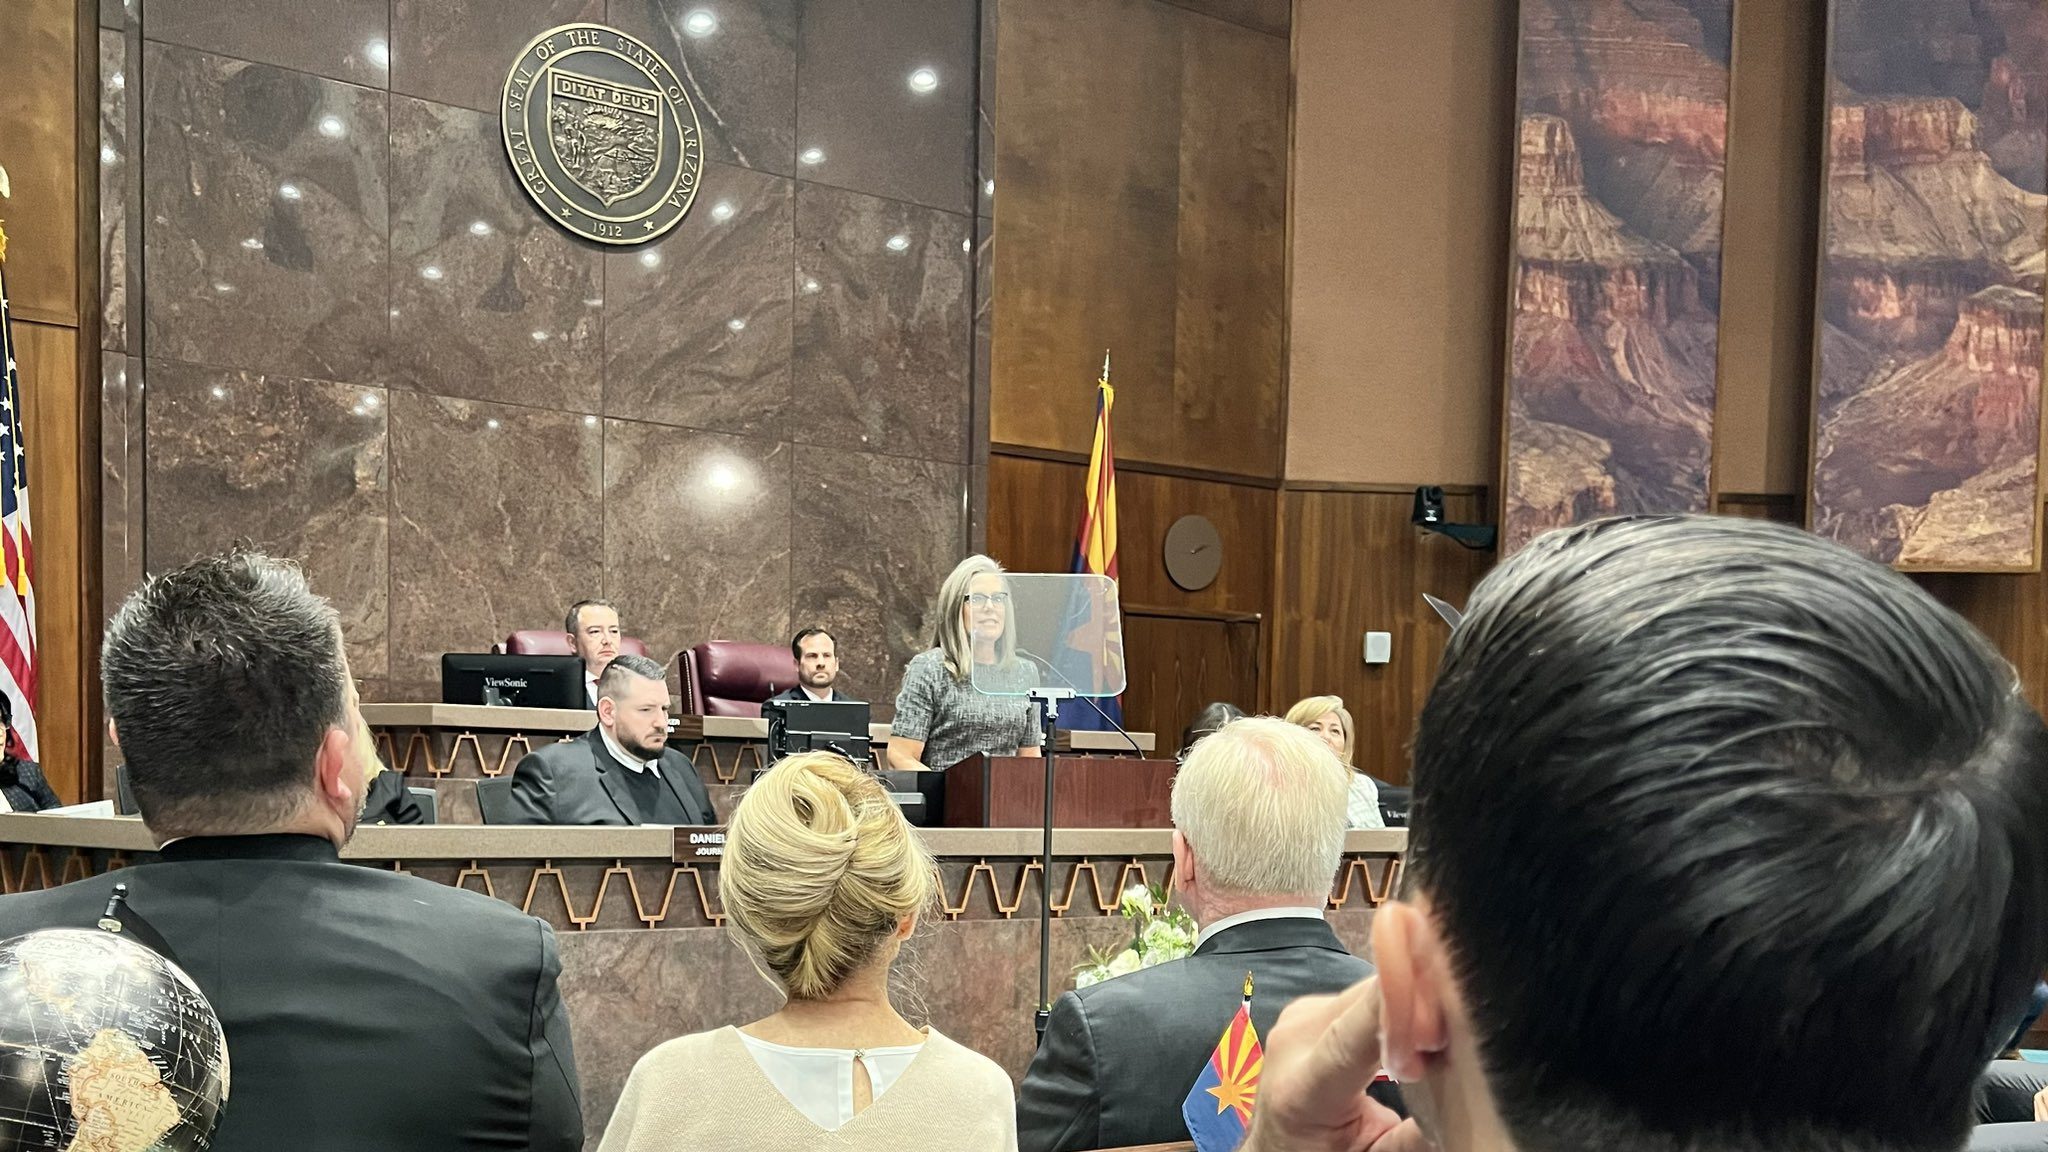 Arizona Gov. Katie Hobbs vows to tackle education reform in 2023 State of the State address